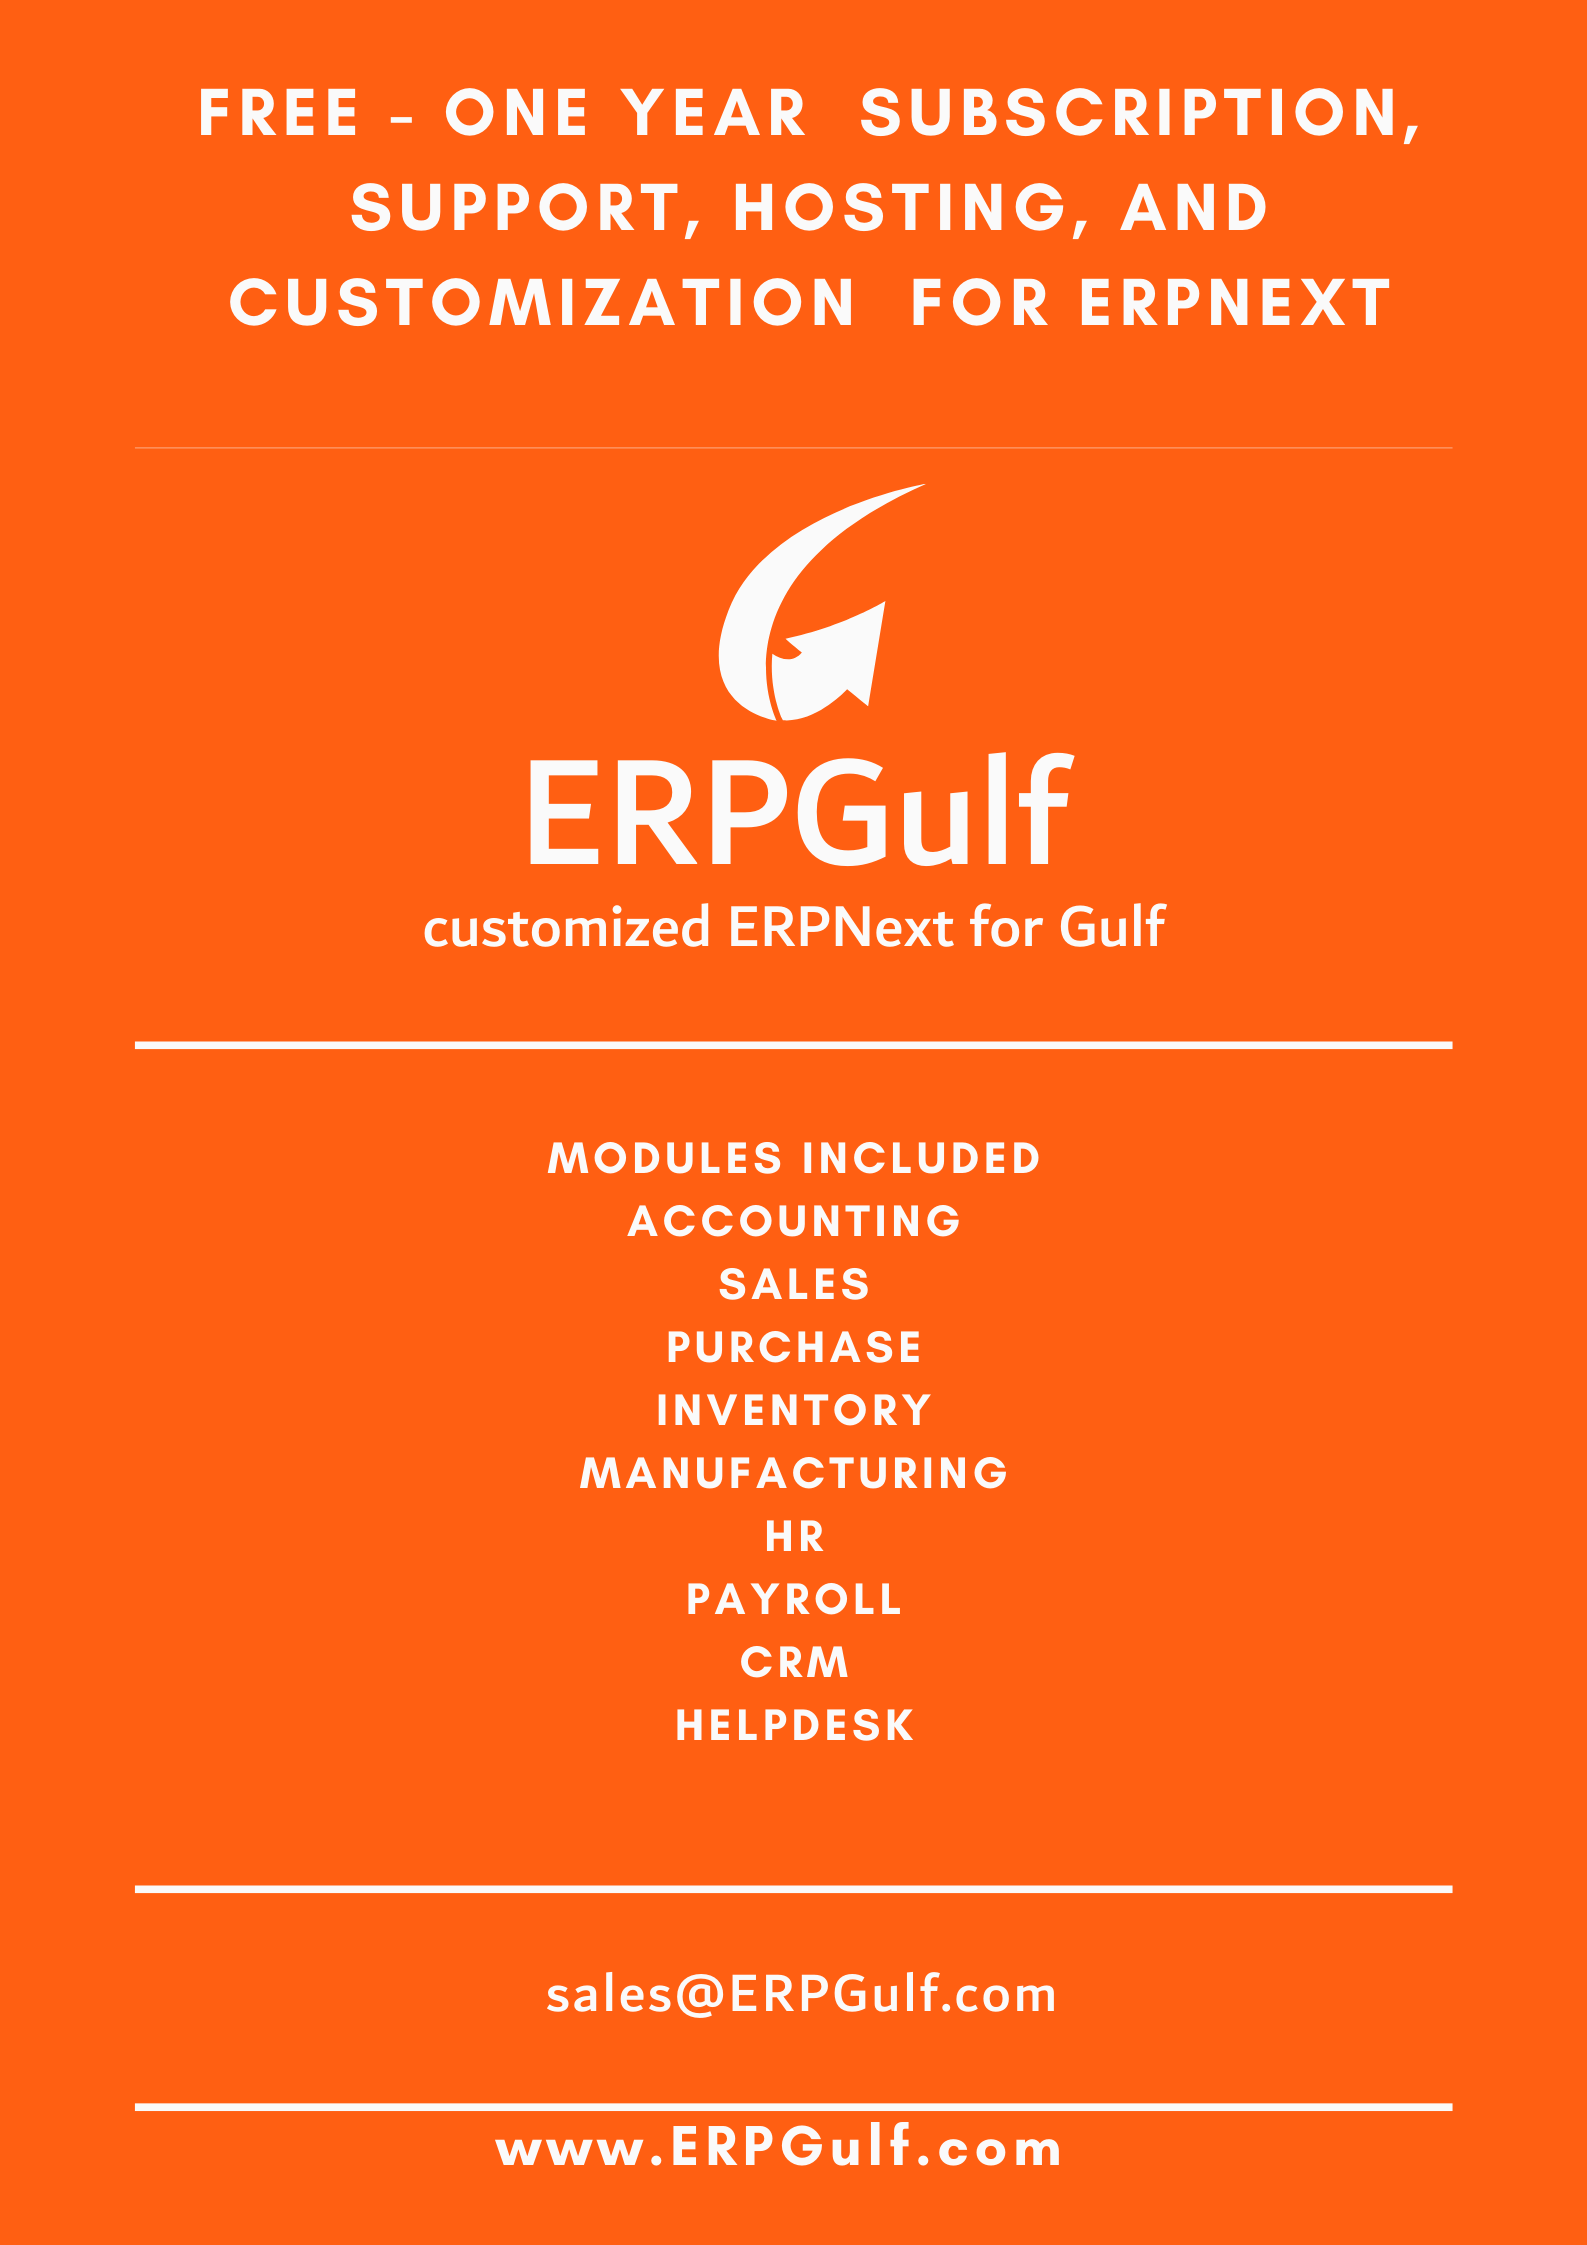 ERPGulf - One year FREE - Cover Image